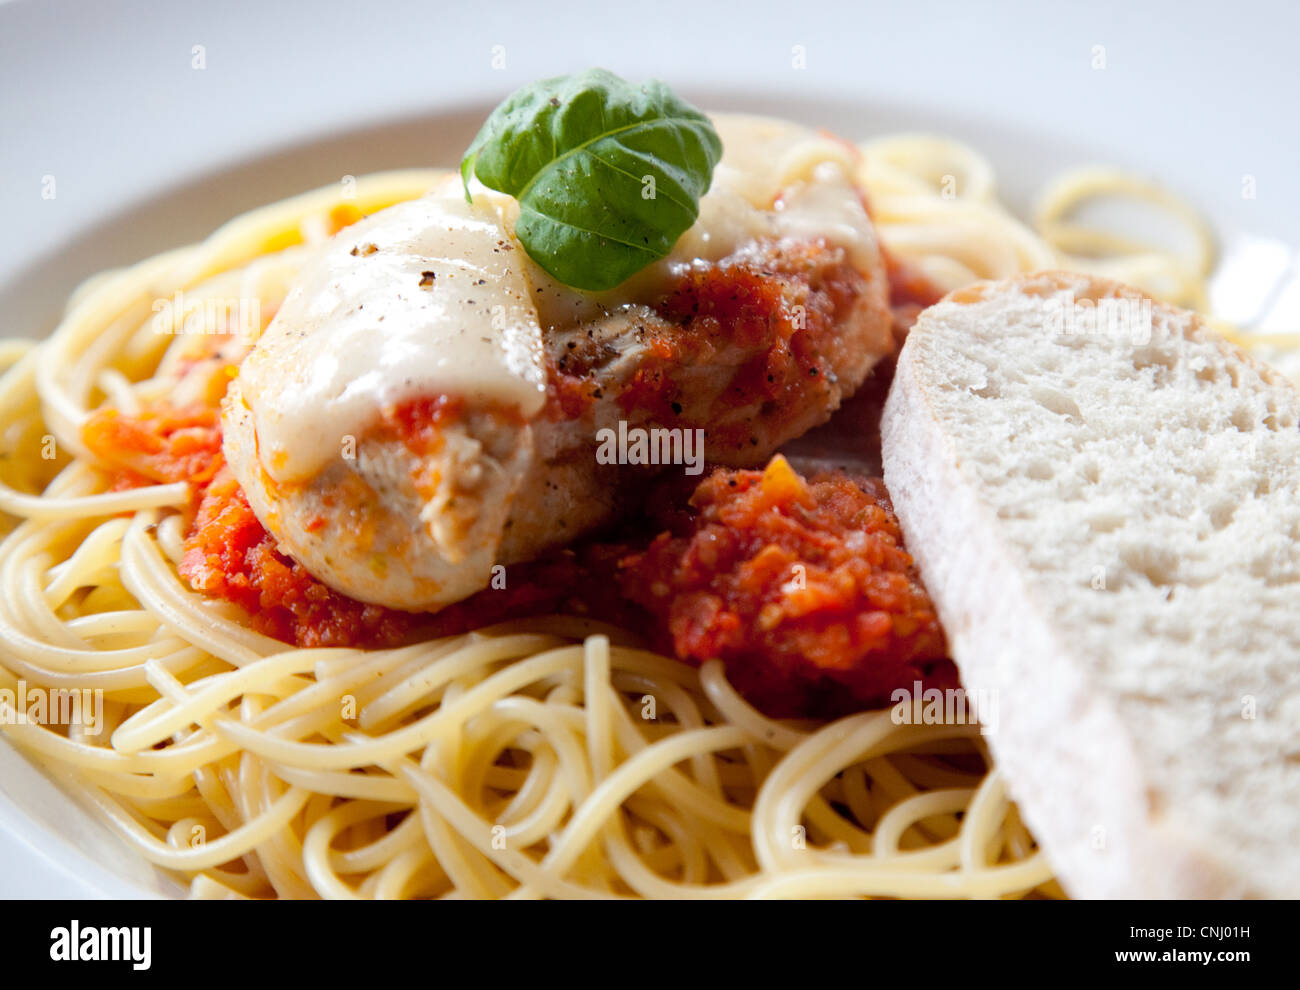 A tasty colour photo of Chicken Parmesan alongside a slice of white bread. Stock Photo